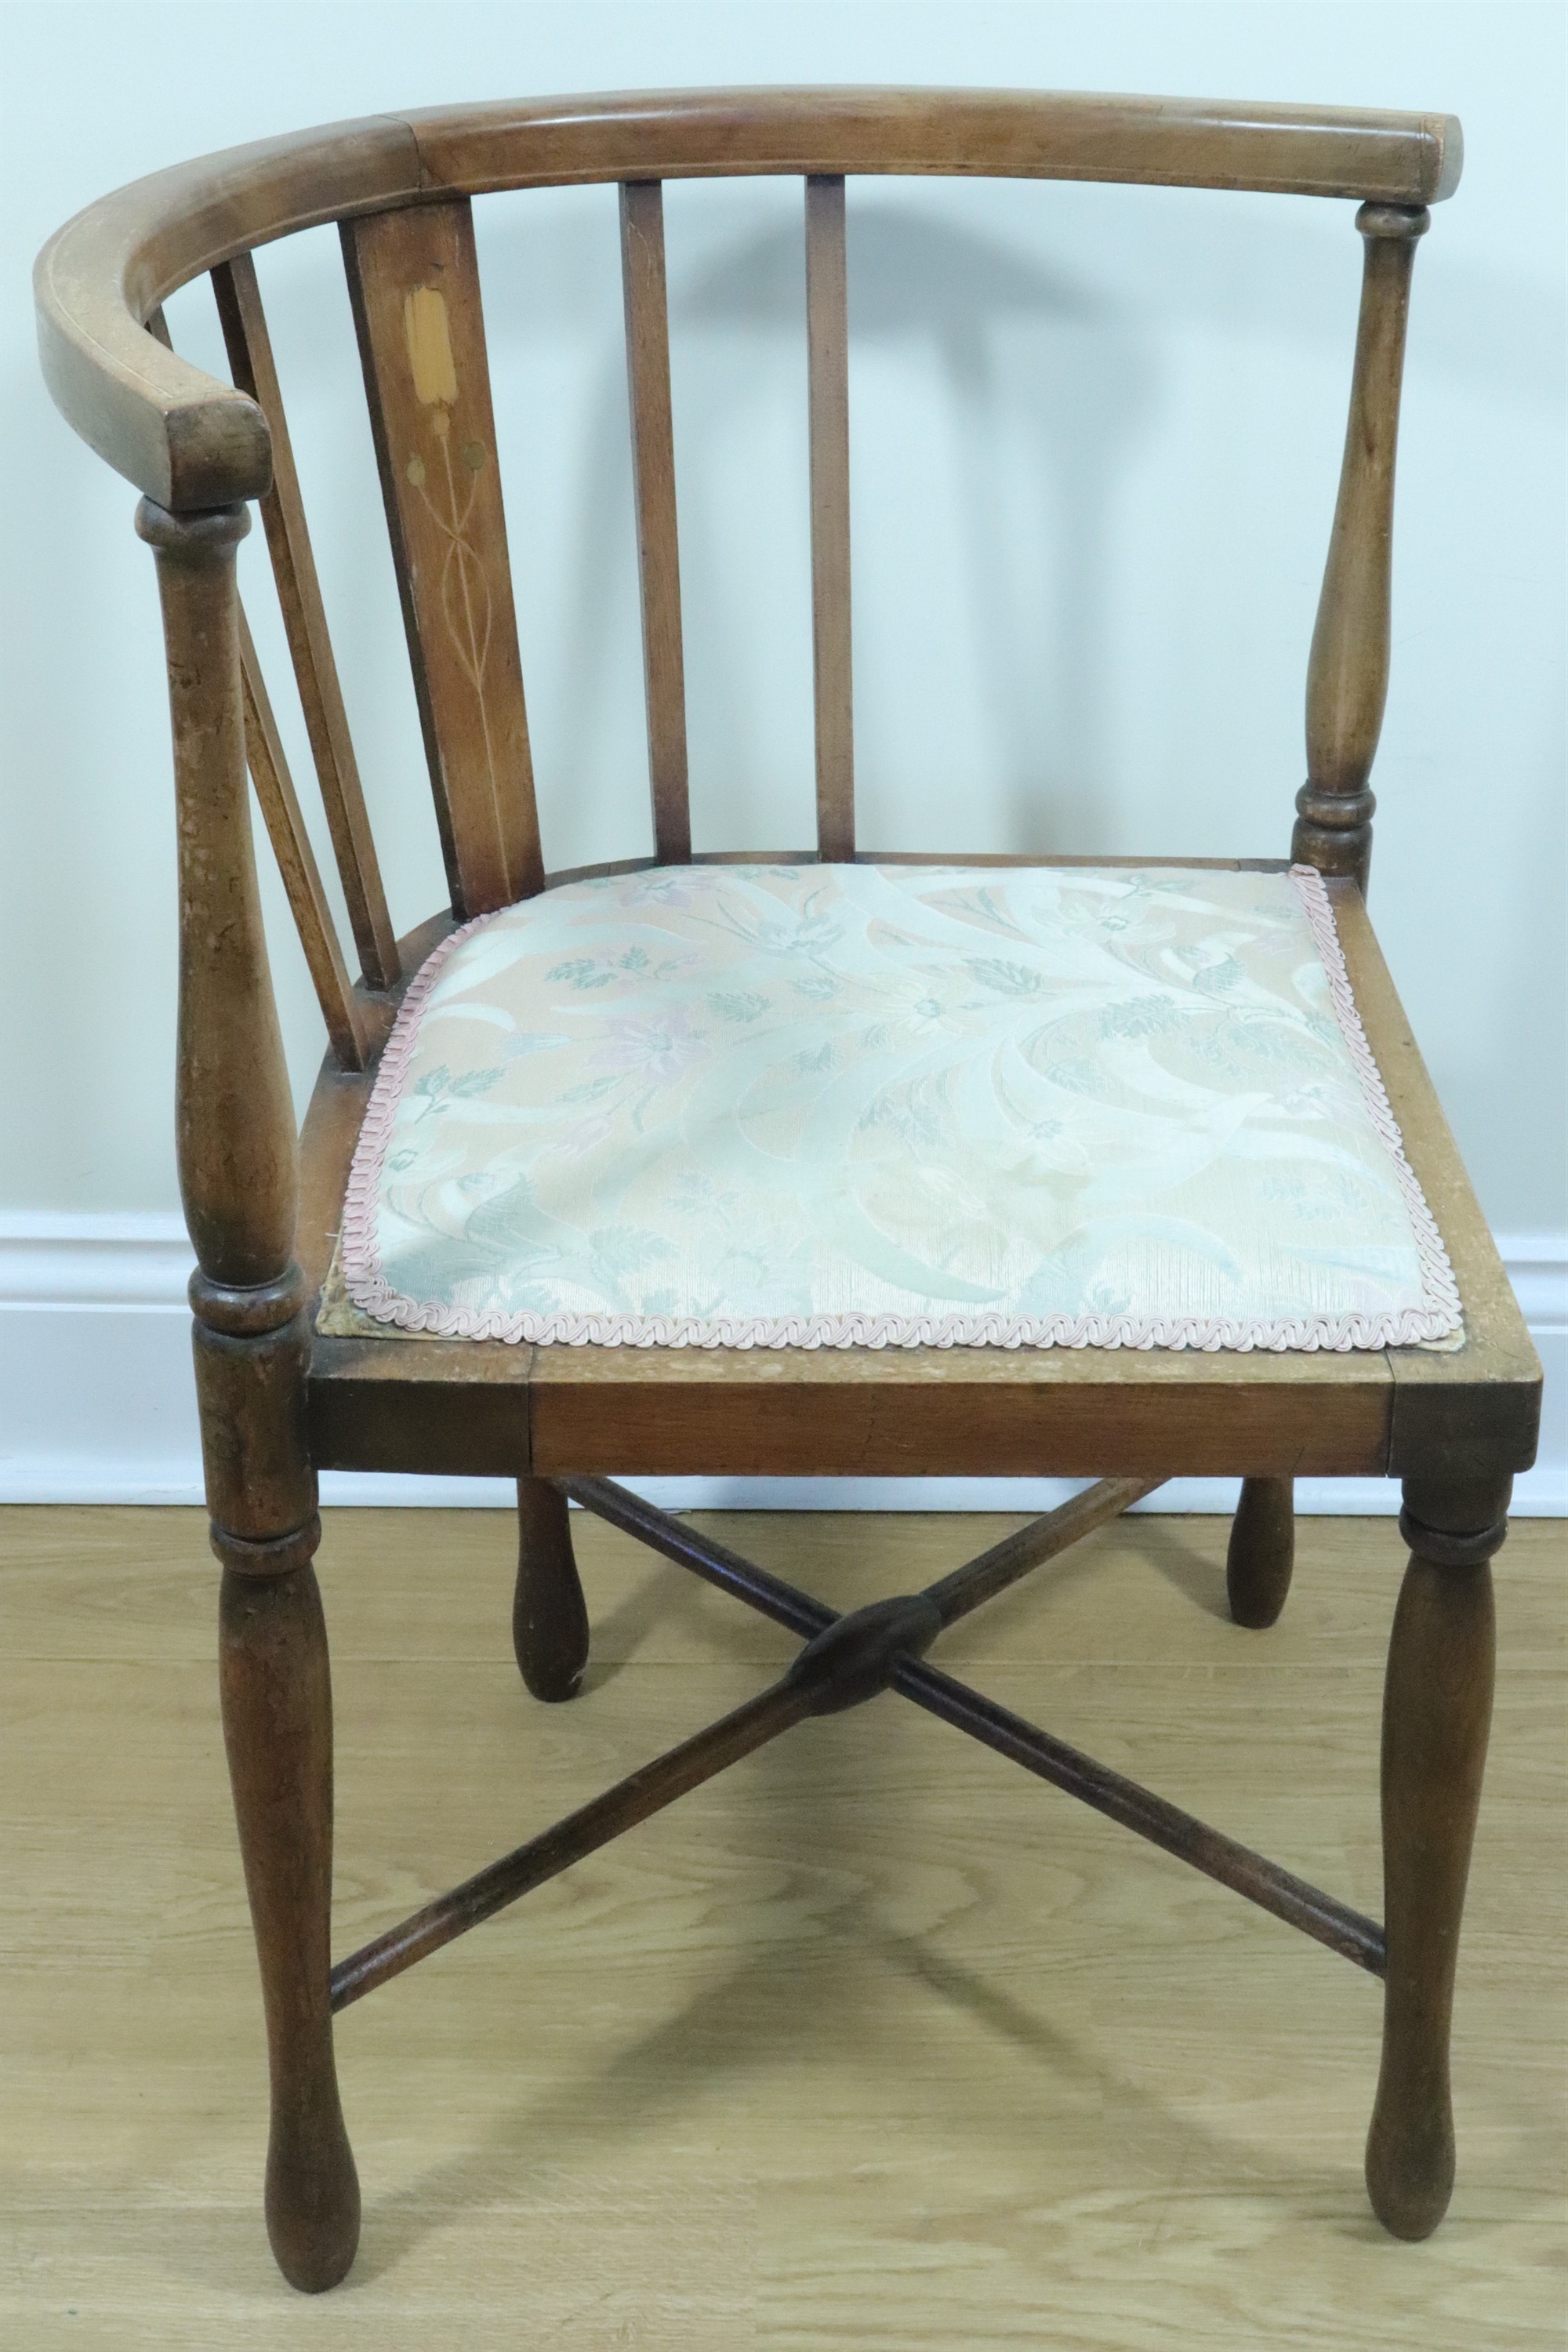 An early 20th Century inlaid mahogany corner chair, the back splat having a stylized tulip inlay, 69